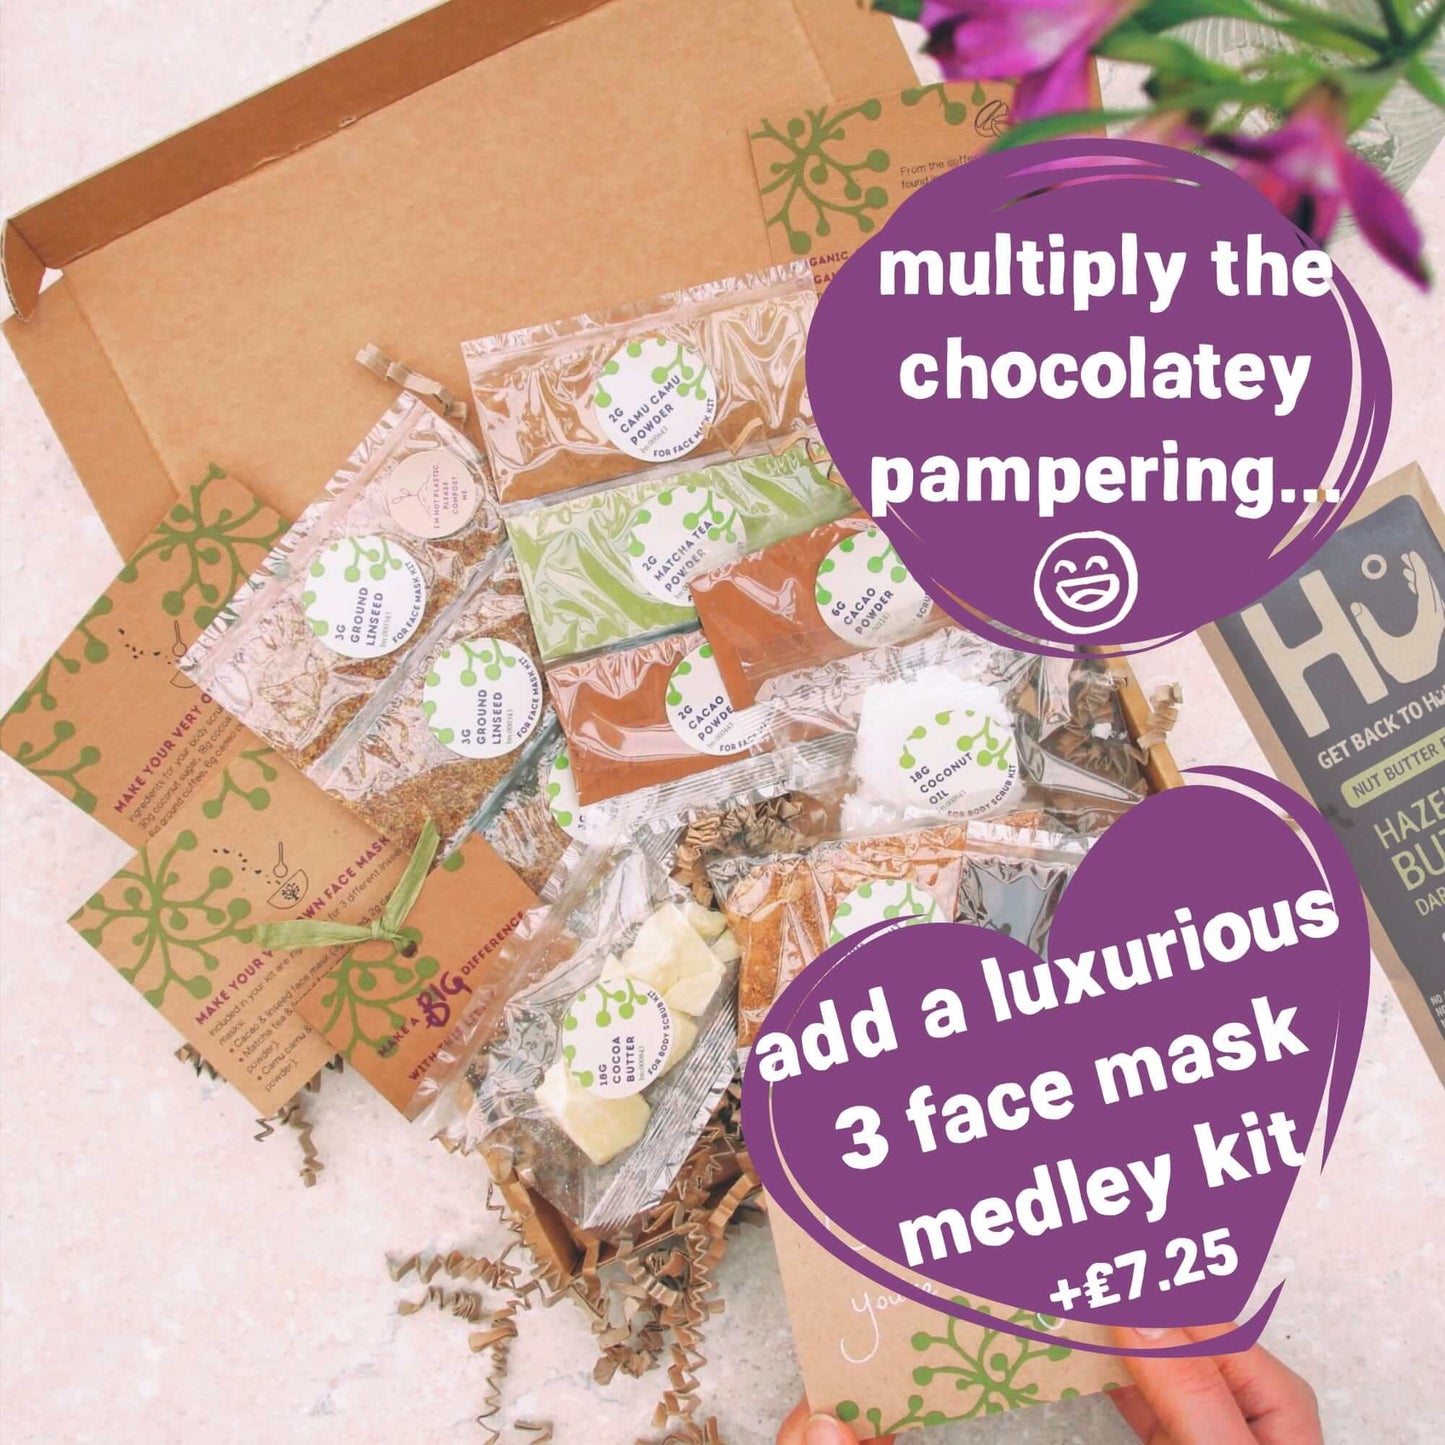 add three eco-friendly face masks to you are amazing letterbox gift